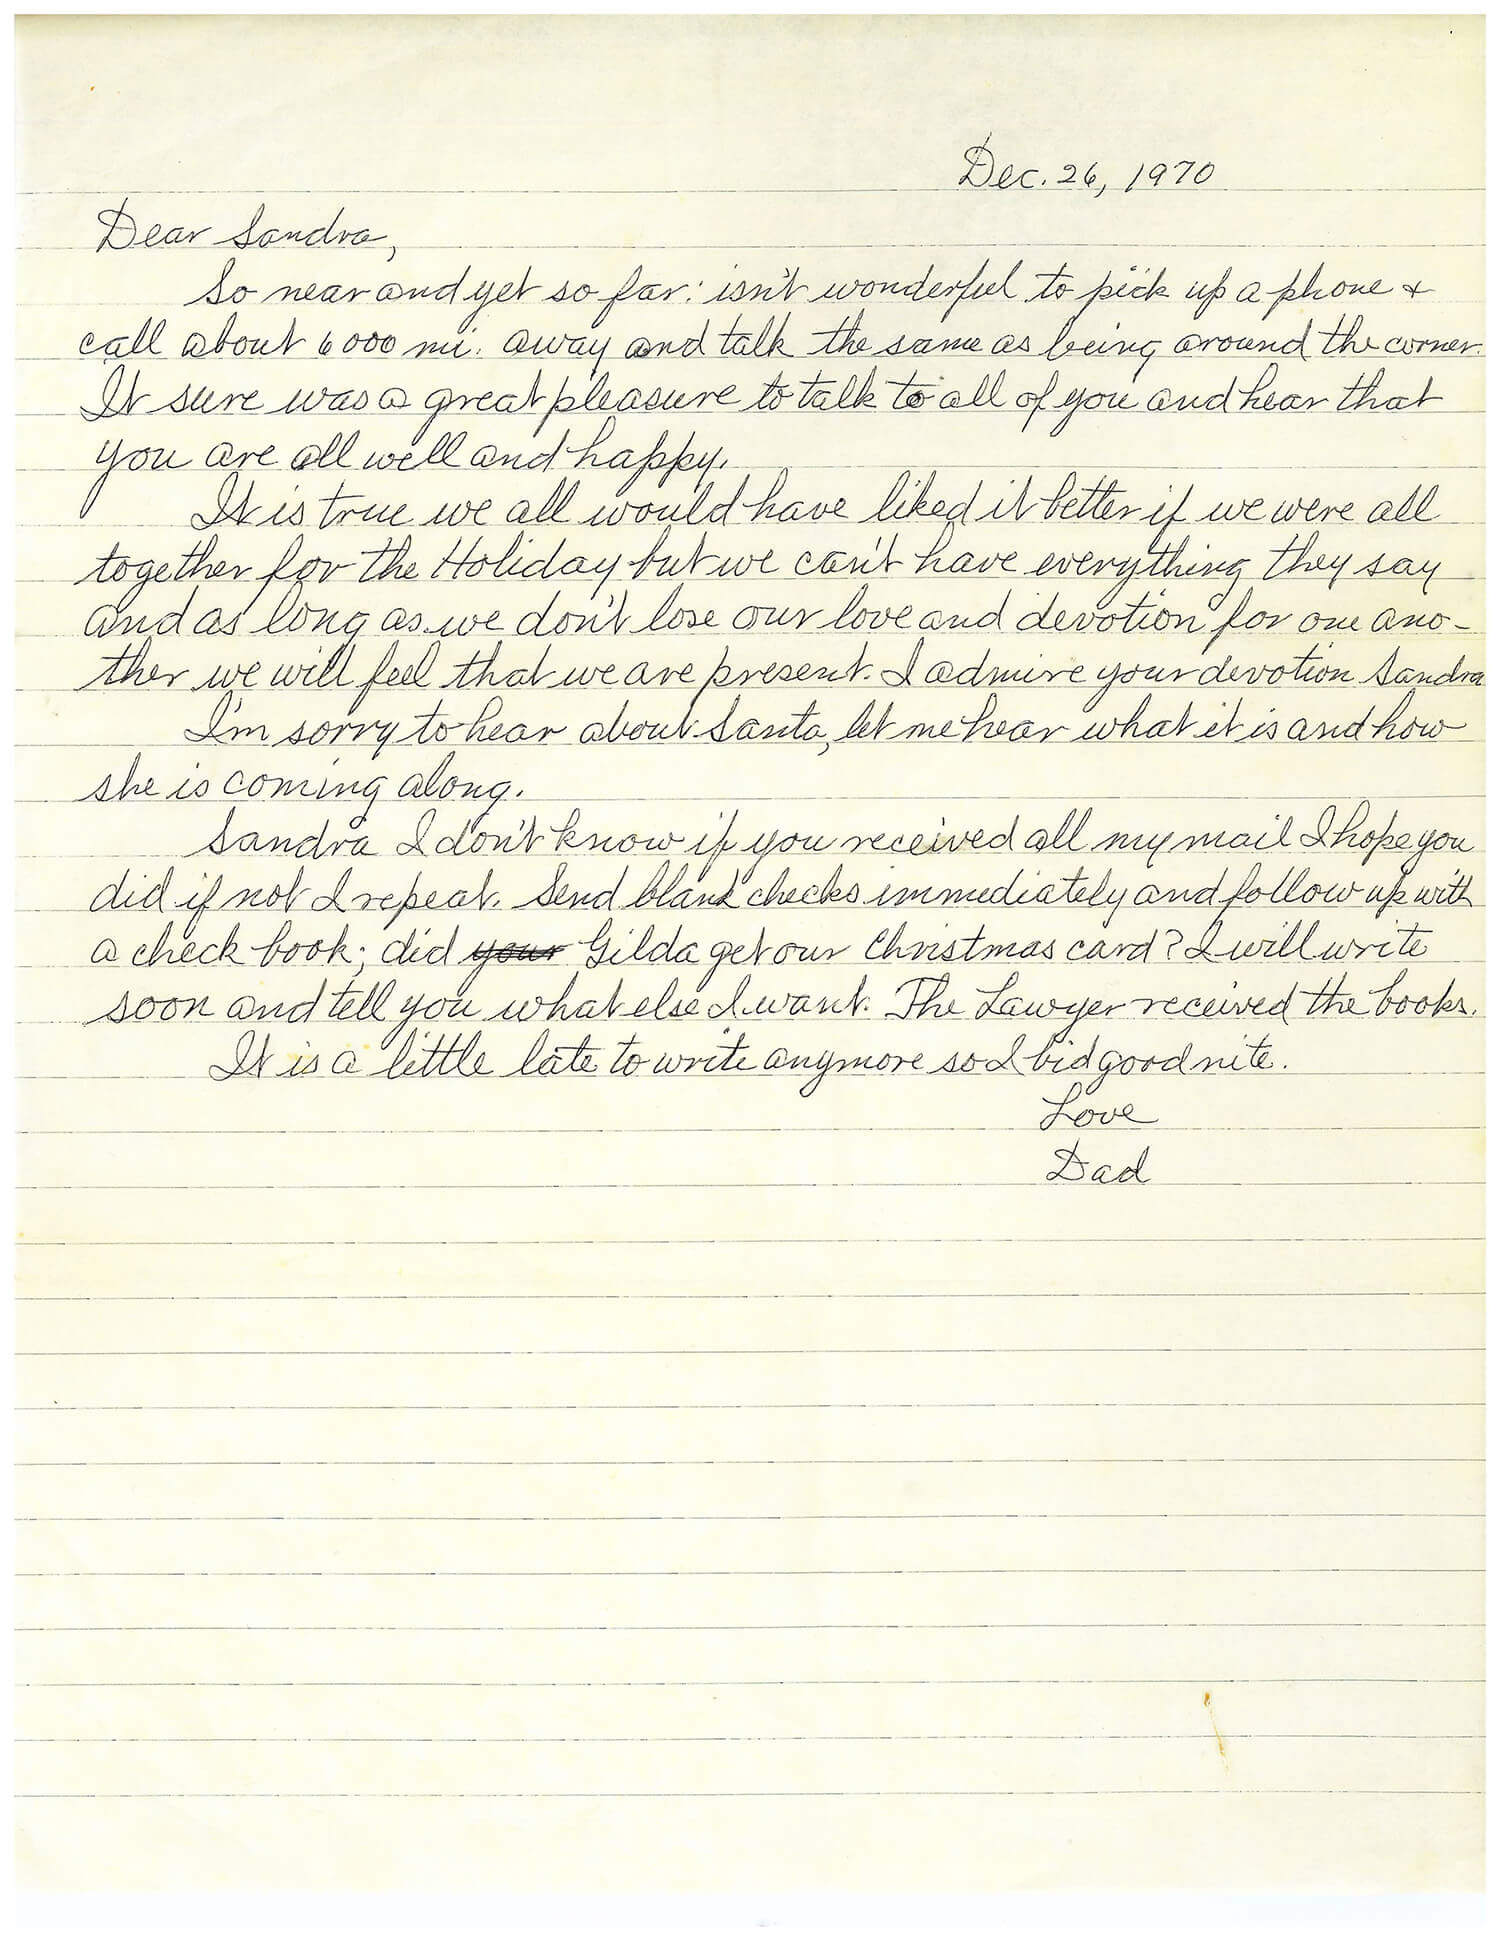 154. A SIGNED LETTER FROM MEYER LANSKY TO HIS DAUGHTER